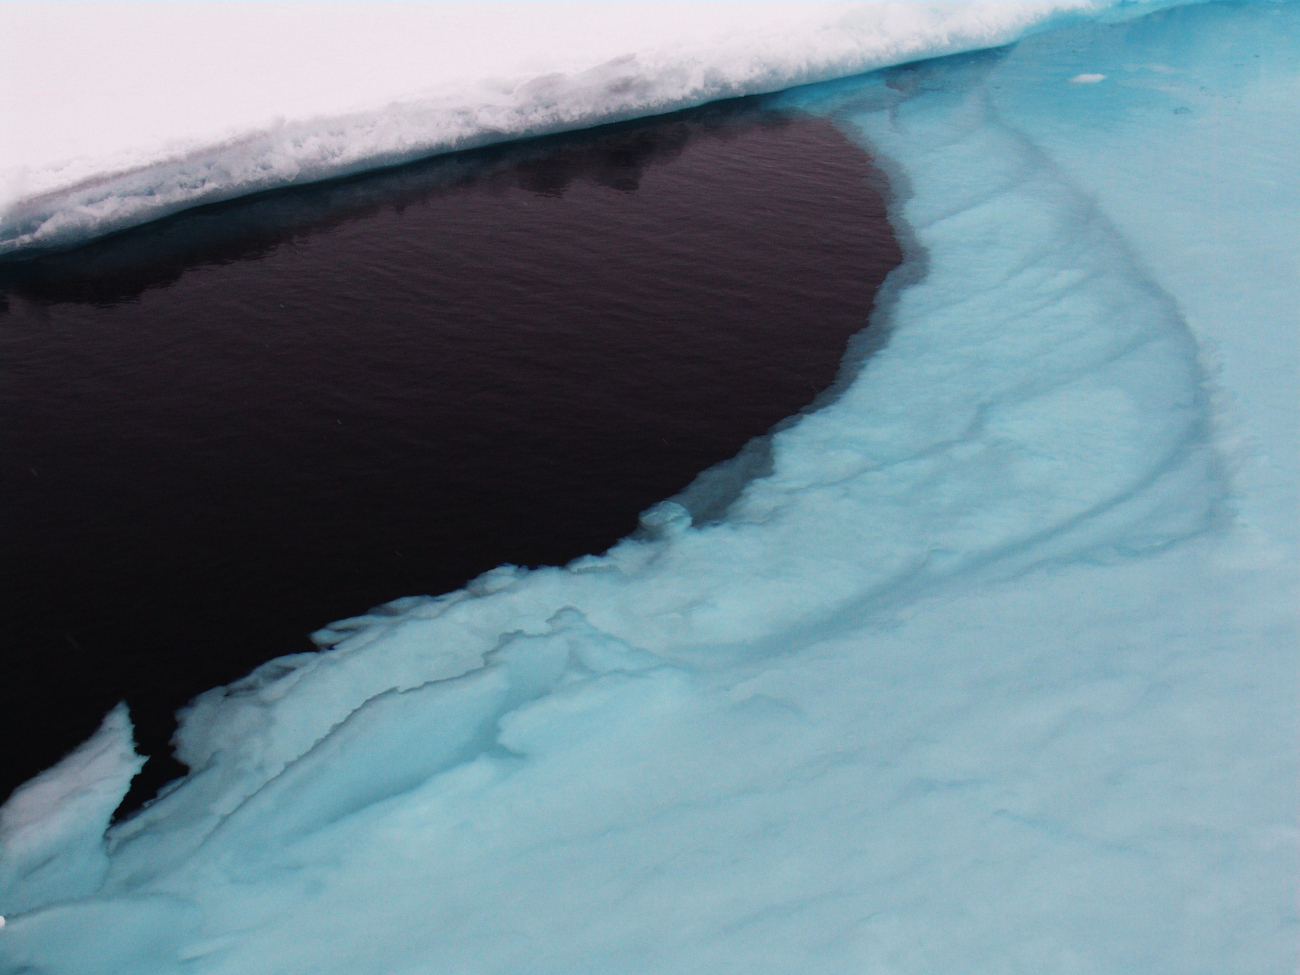 Snow surface of piece of an ice floe that has been pushed under water by thereclosing of a lead